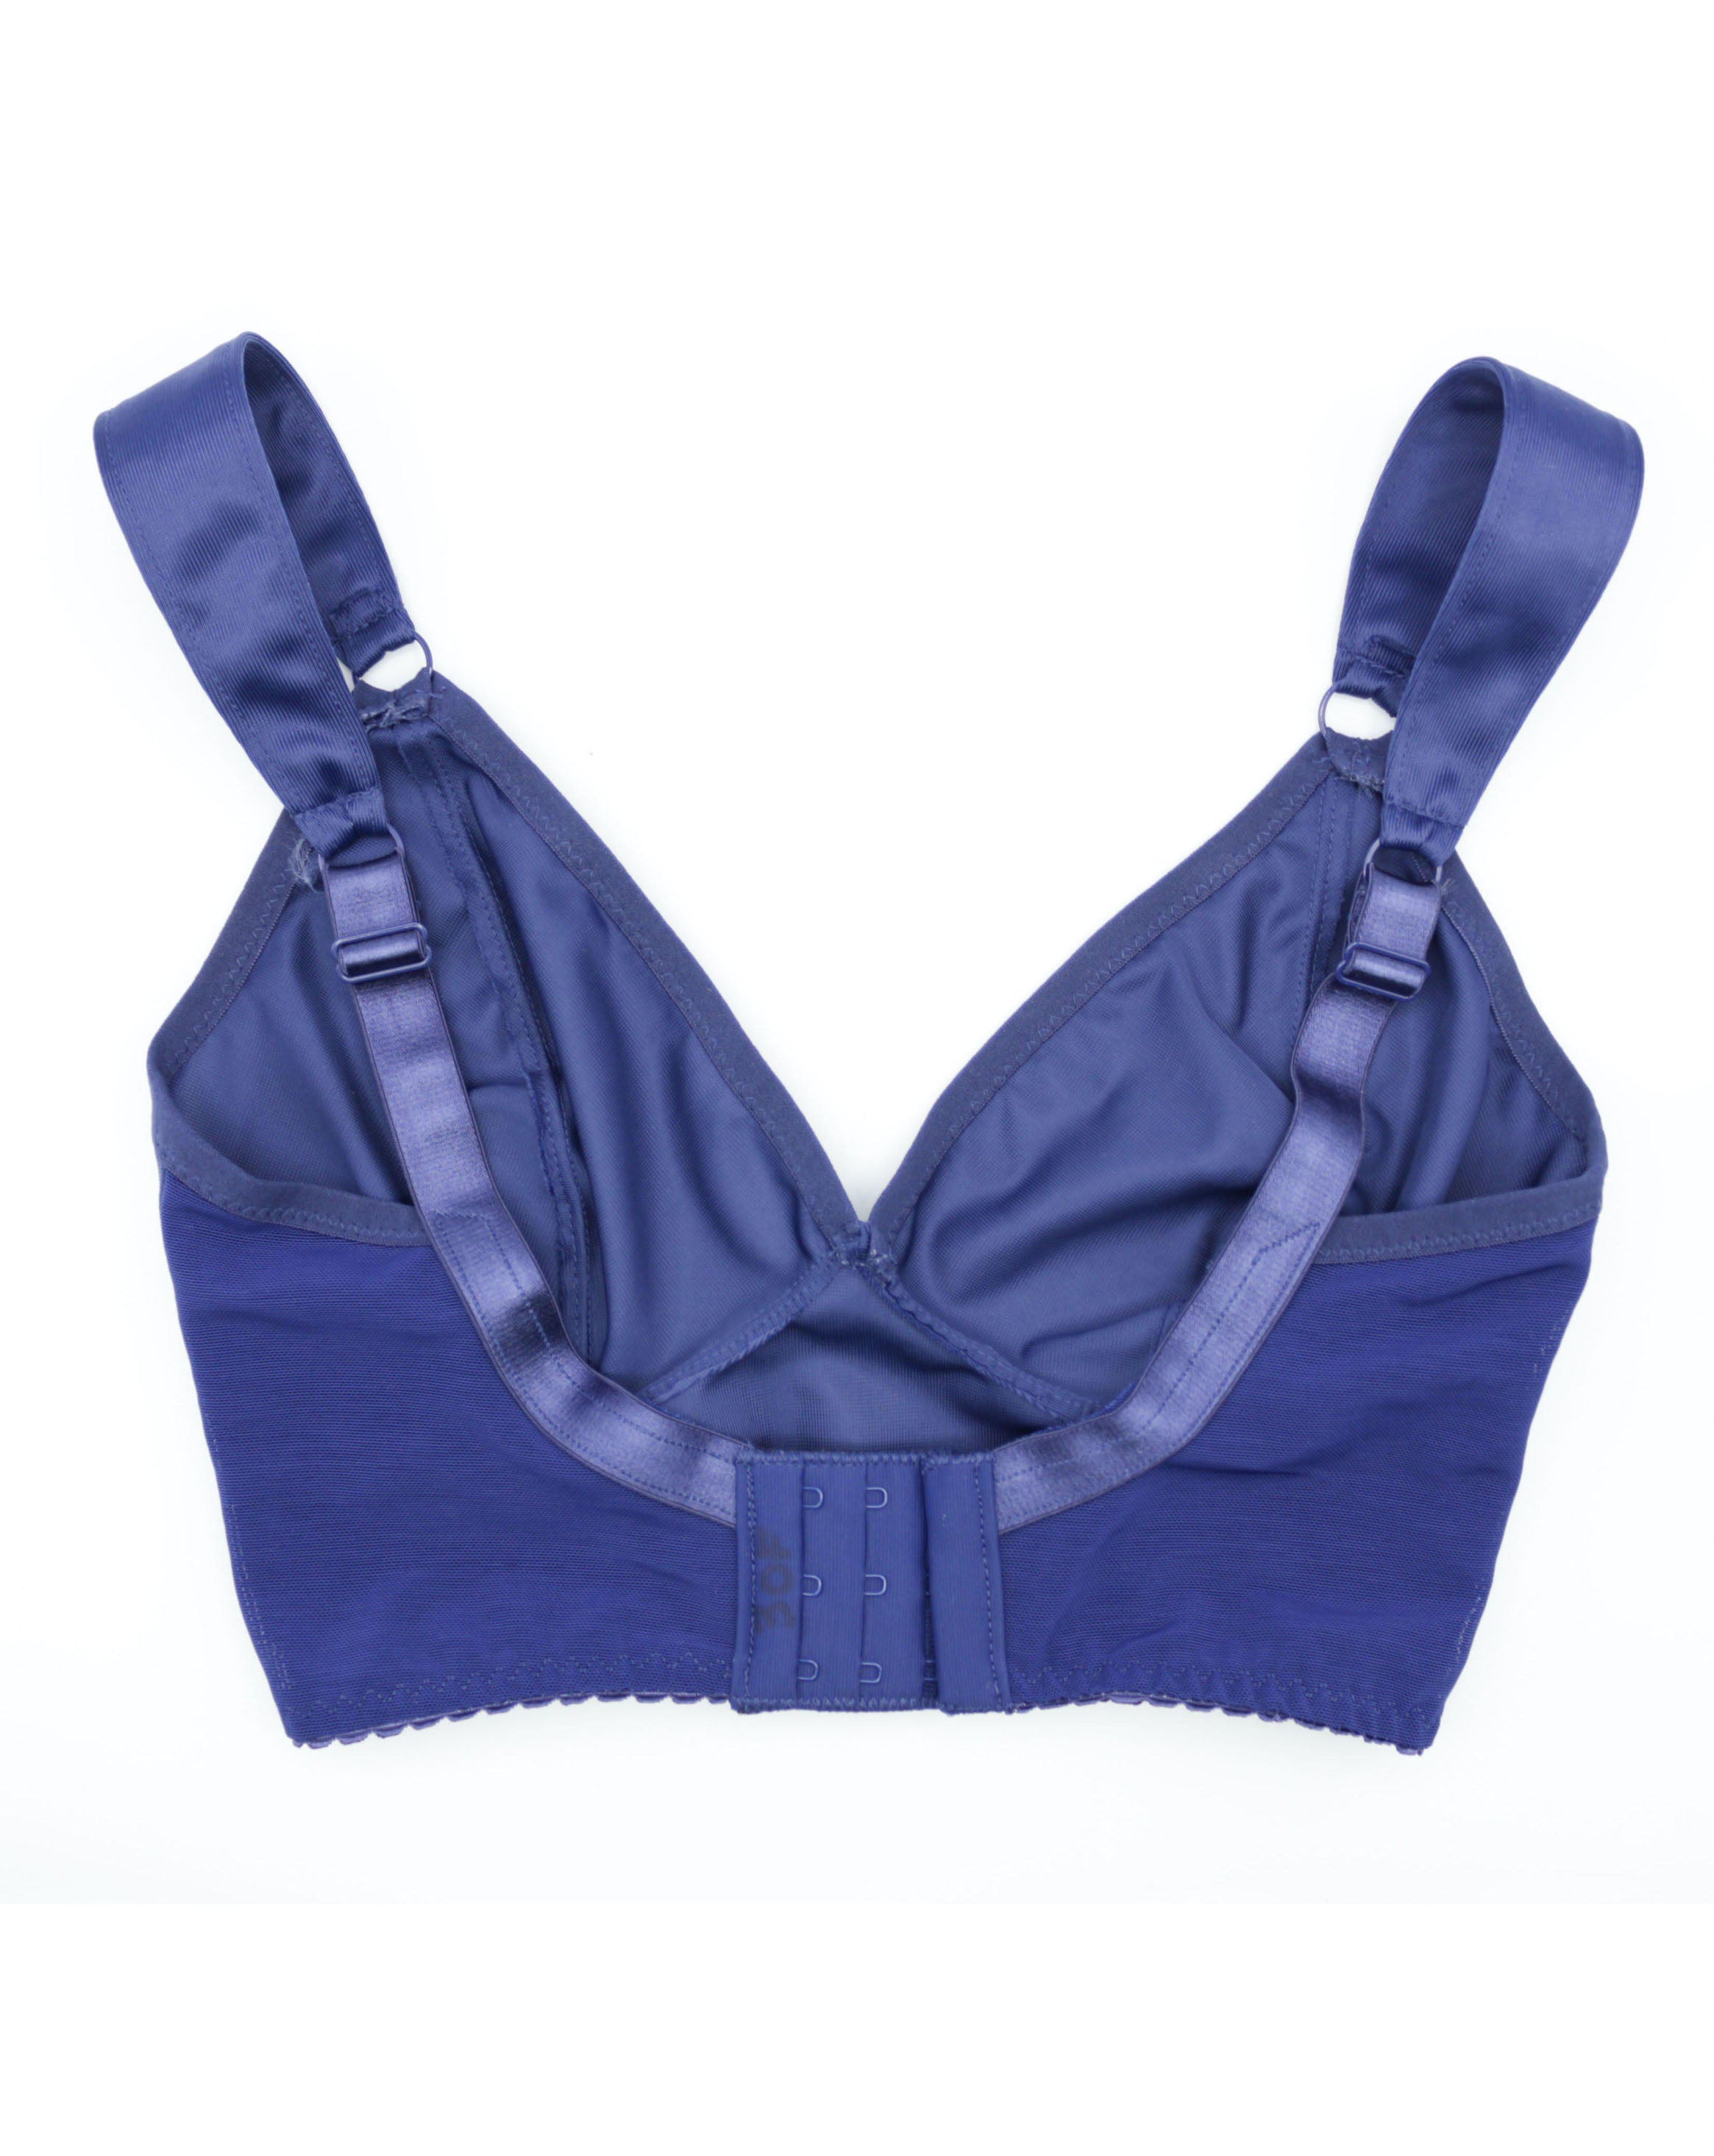 Back view of a custom made wireless bra in minimal solid blue color/colour made to order by Rubies Bras.